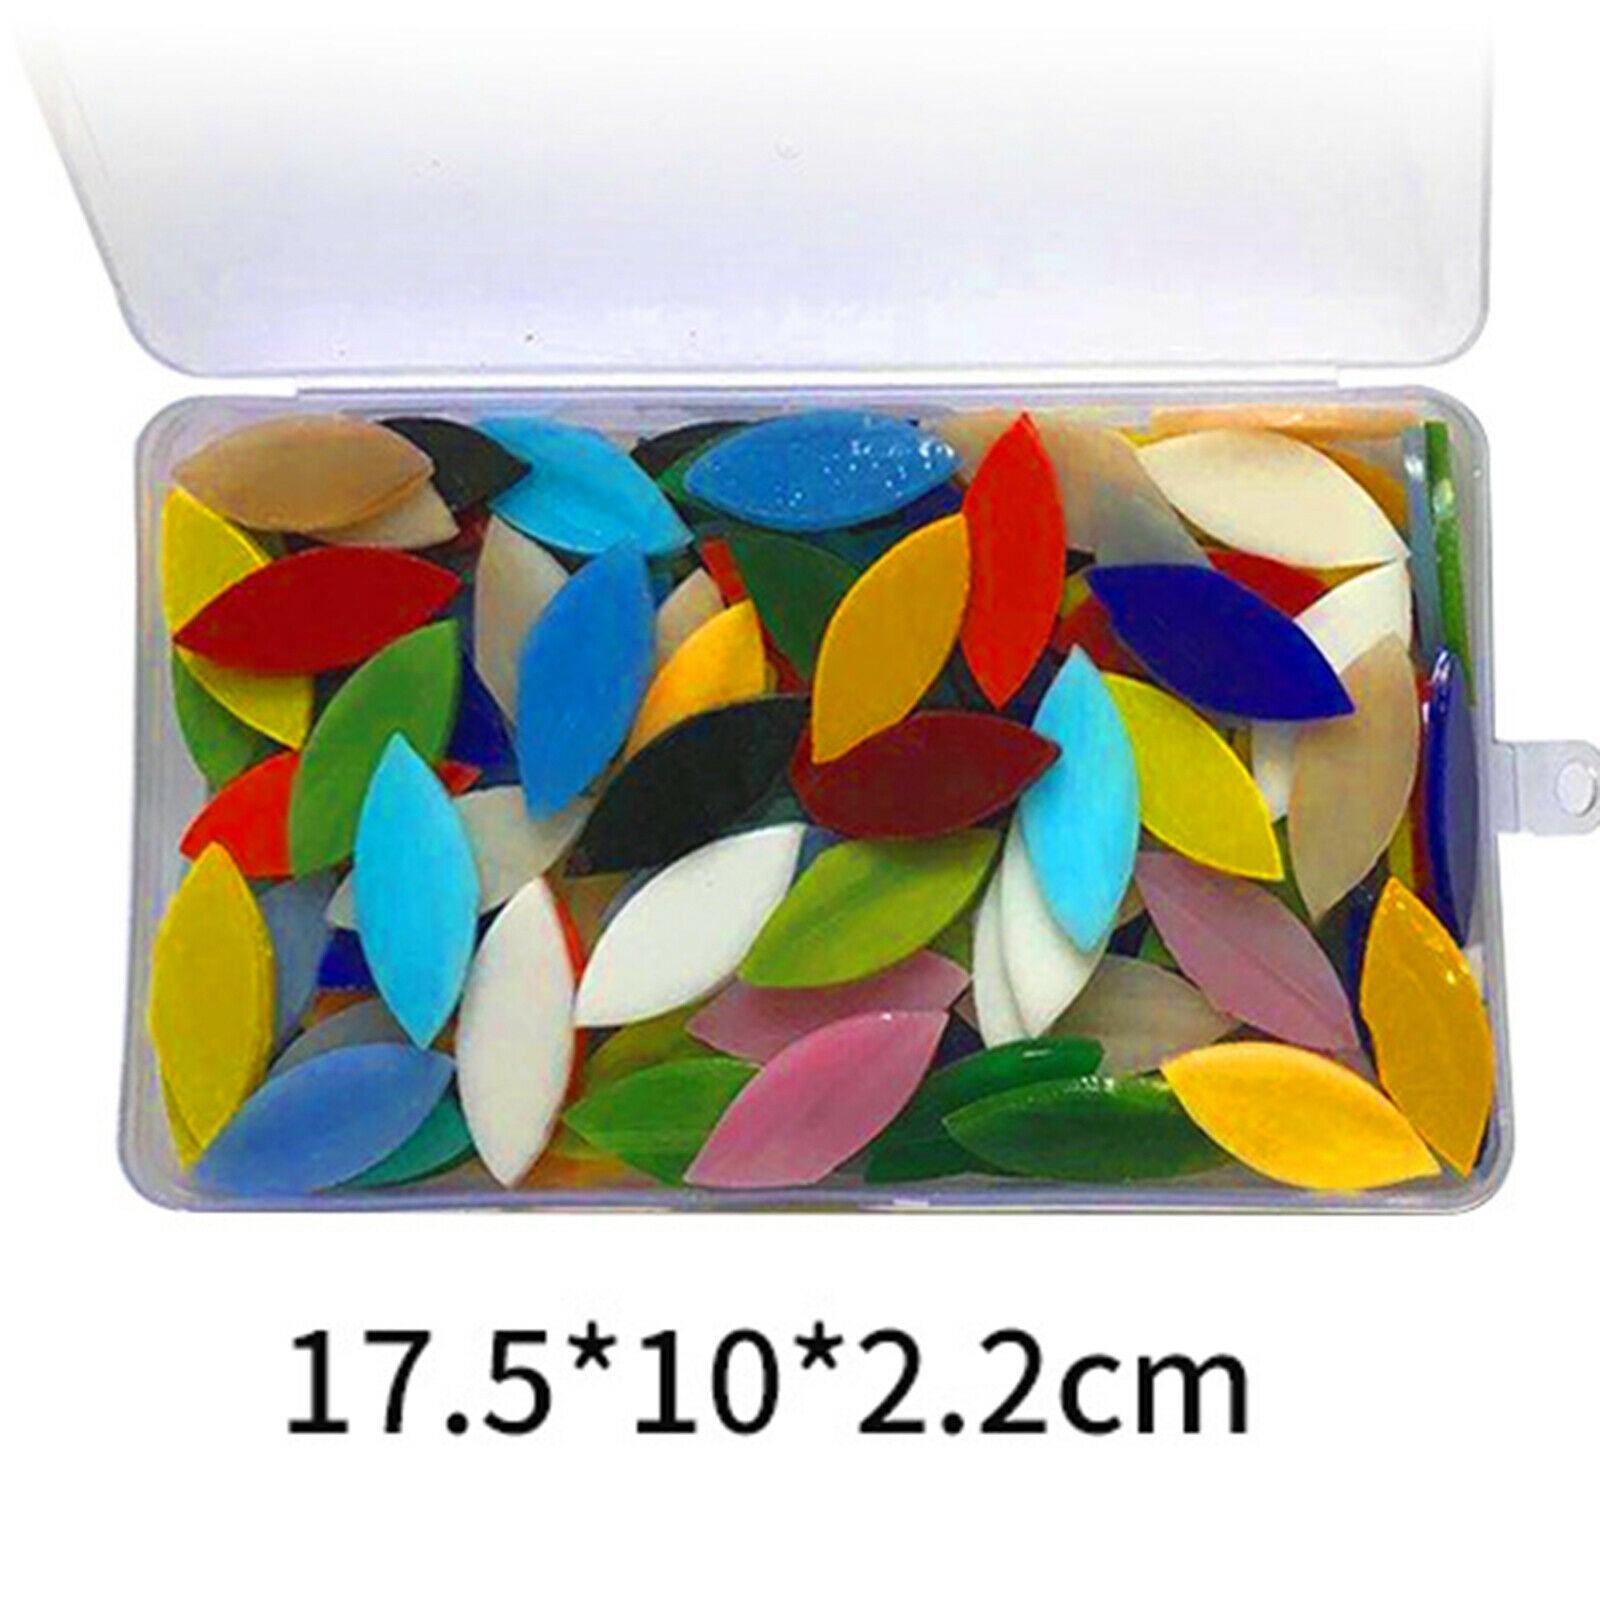 200pcs Assorted Colors Mosaic Tiles Stained Glass Crafts Garden Seat Table